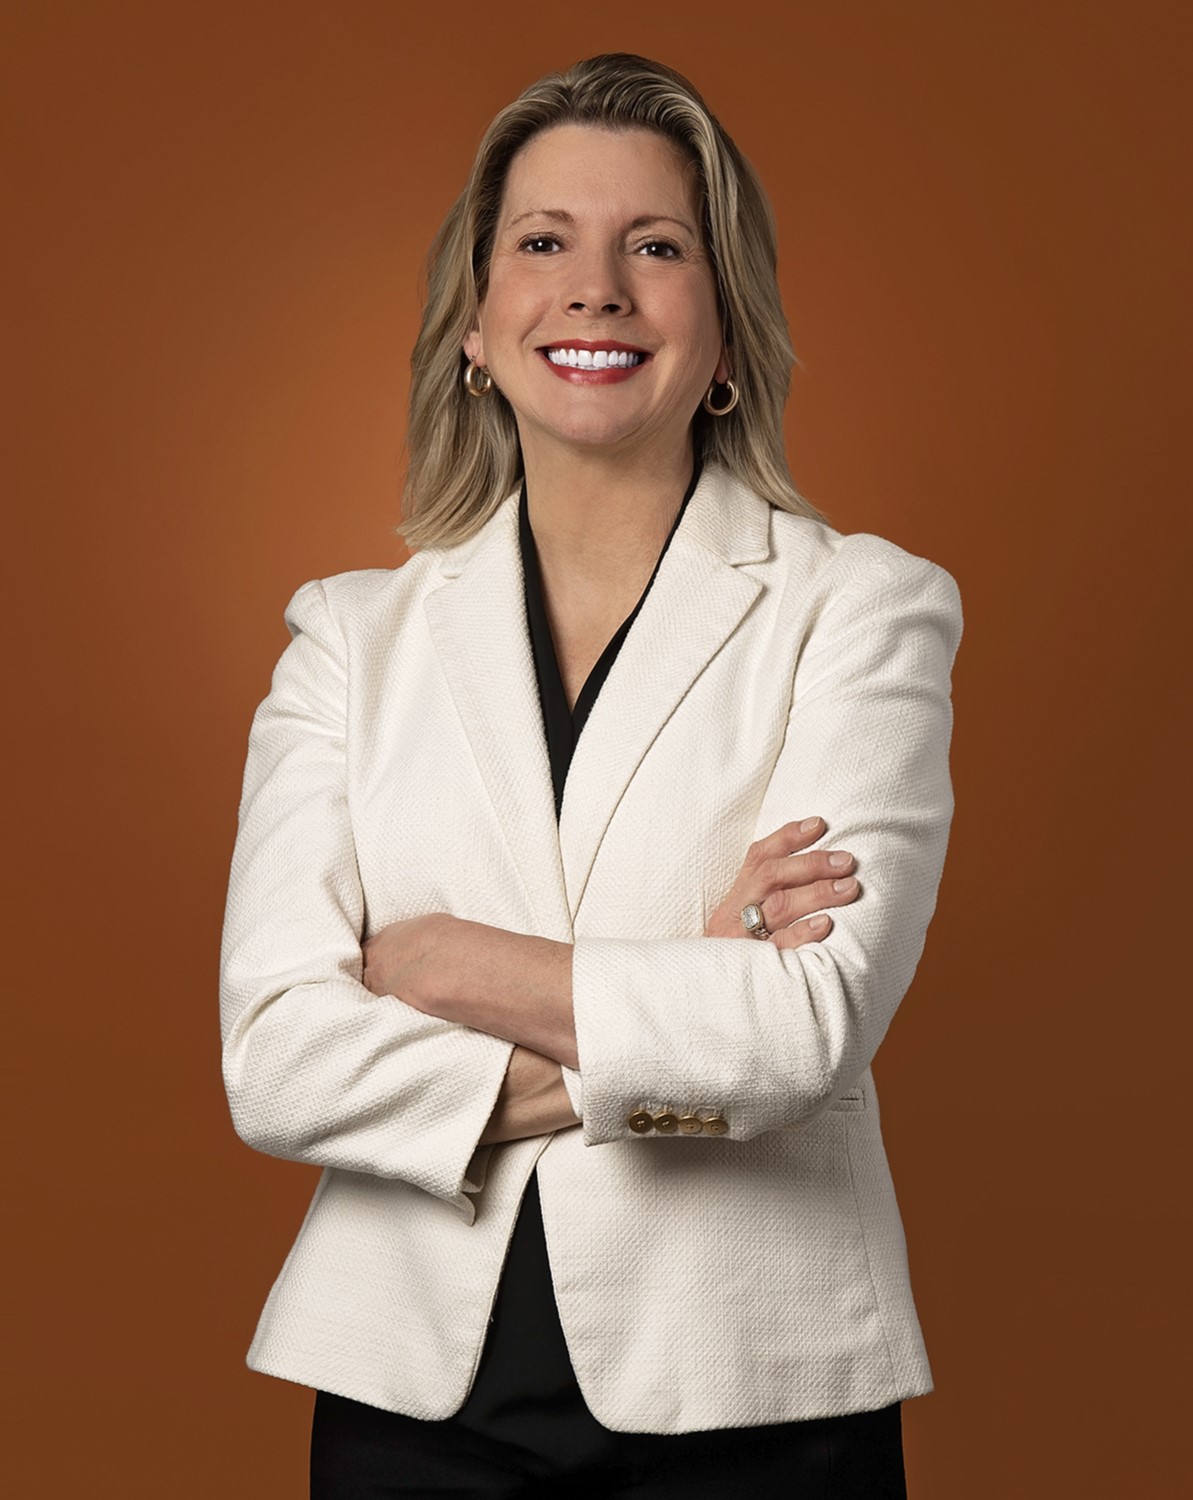 Photo of Susie Nicholson with blank background